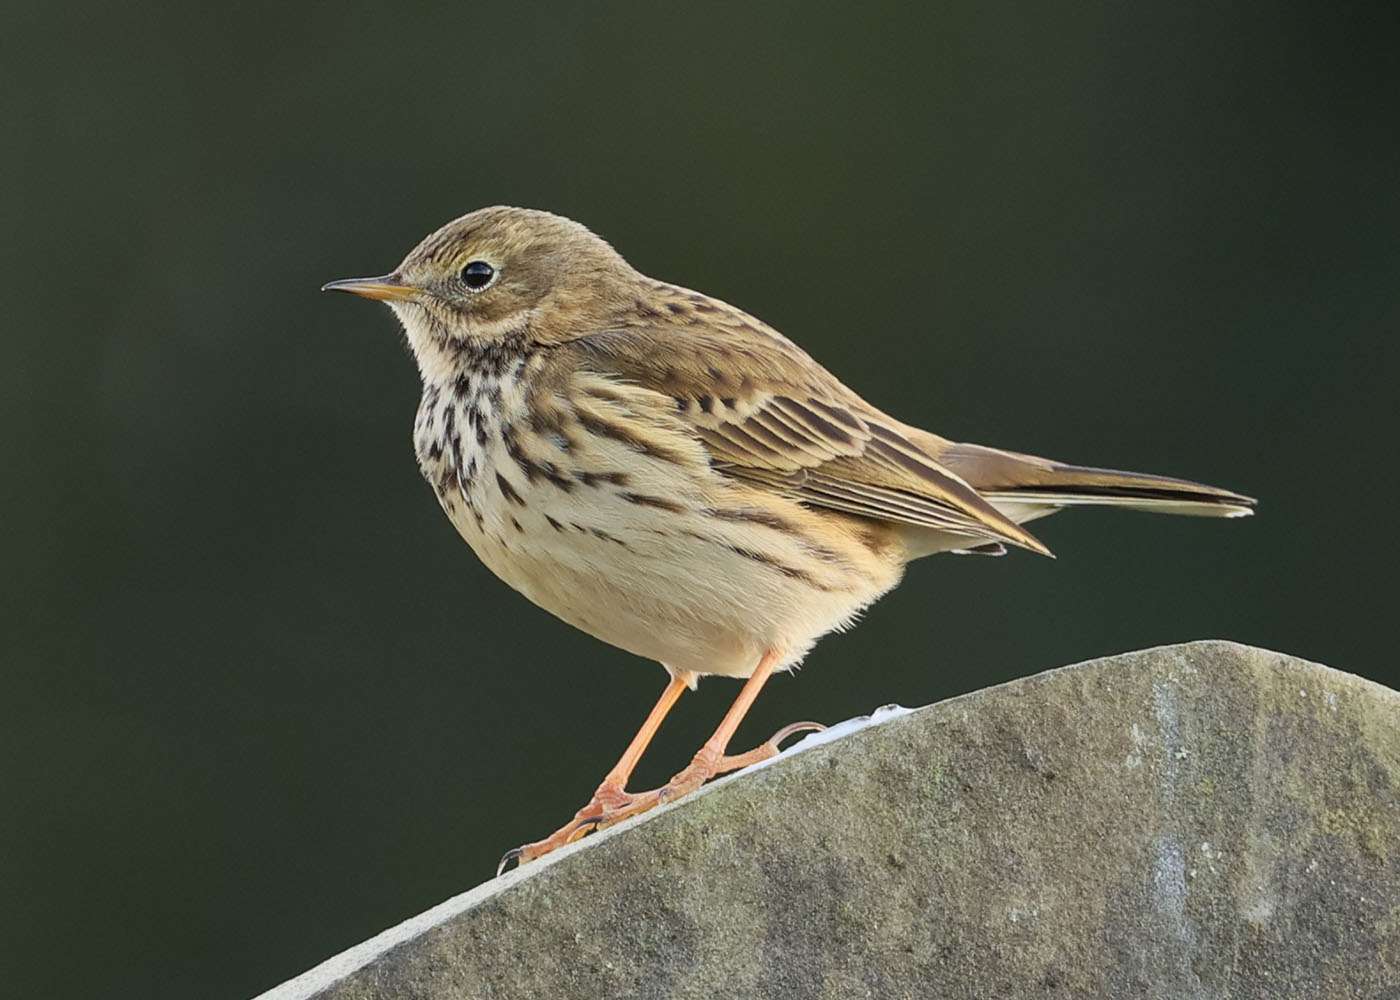 Meadow Pipit by Steve Hopper at Ford Park